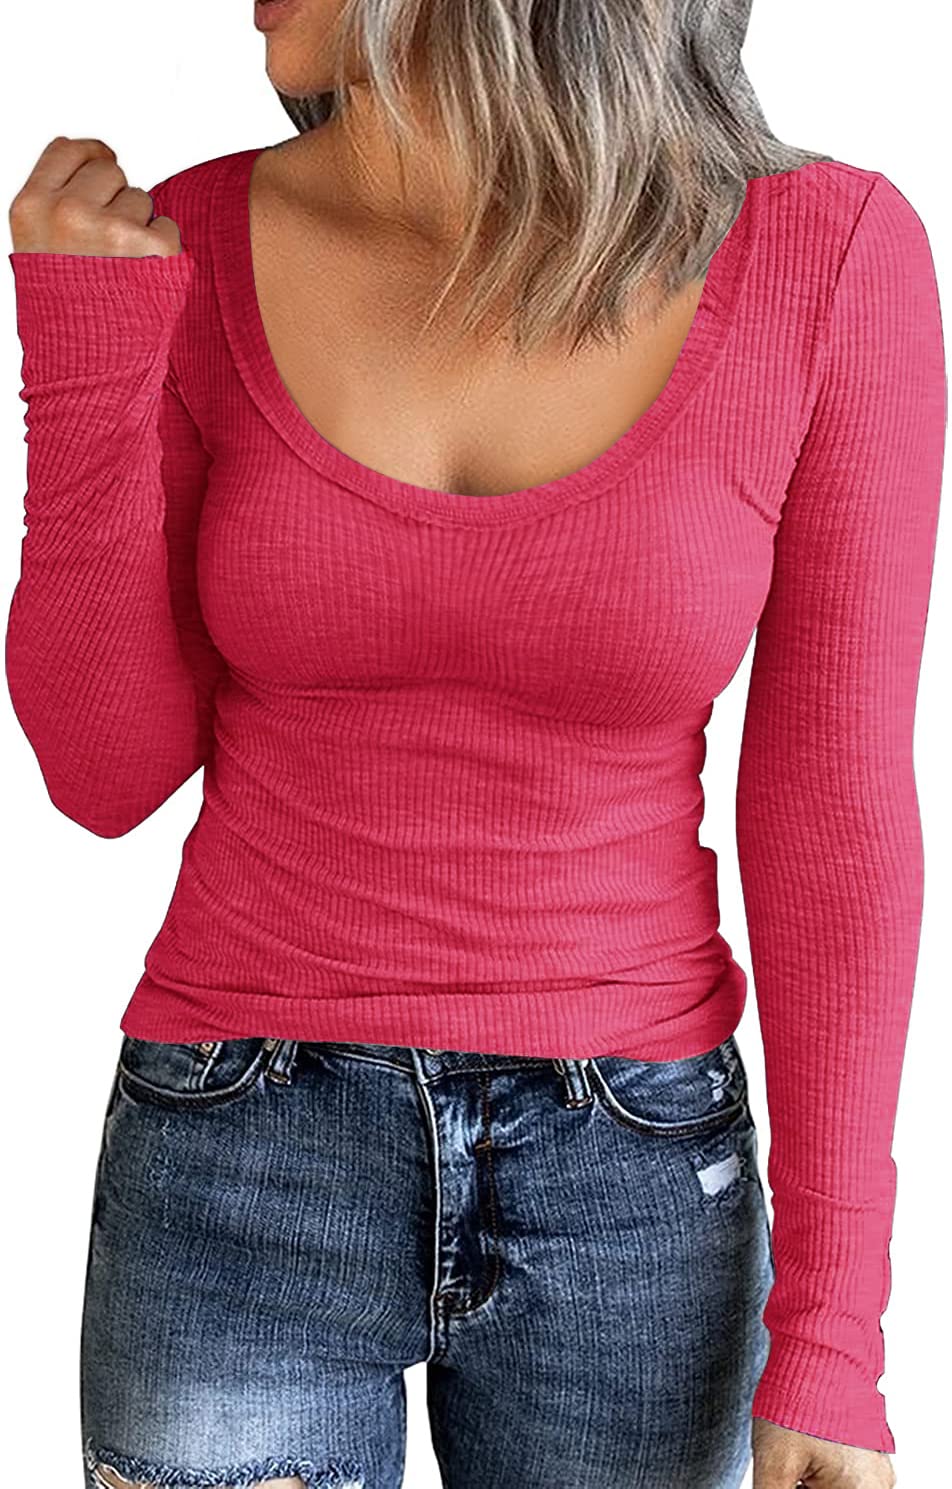 Roselux Women Long Sleeve Scoop Neck Ribbed Fitted Knit Shirt Cotton Basic Thermal Henley Tops (Hot Pink L)